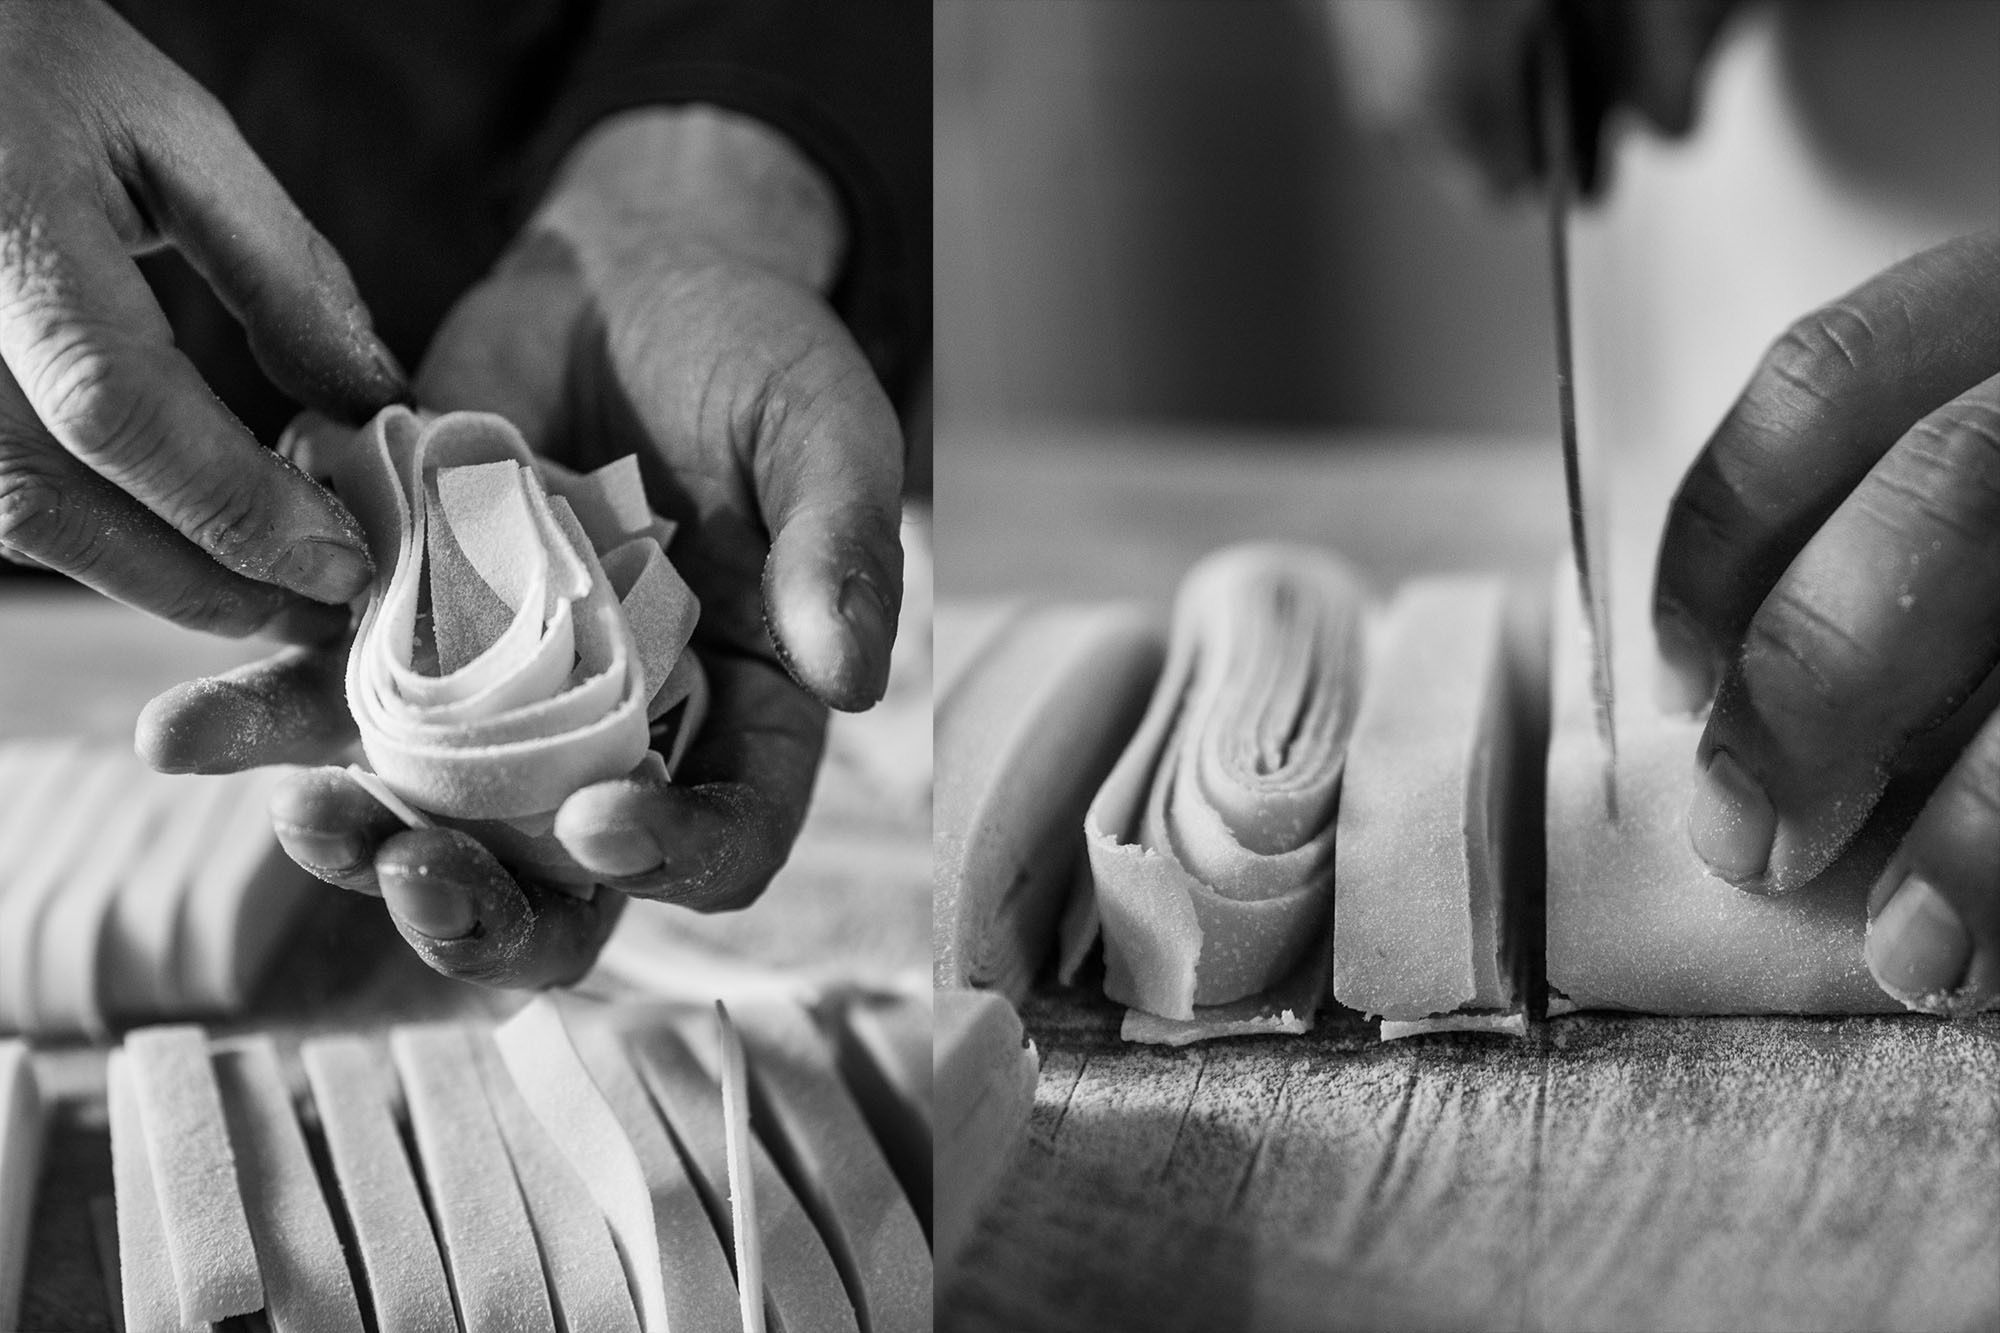 Handmade pasta being made with love.